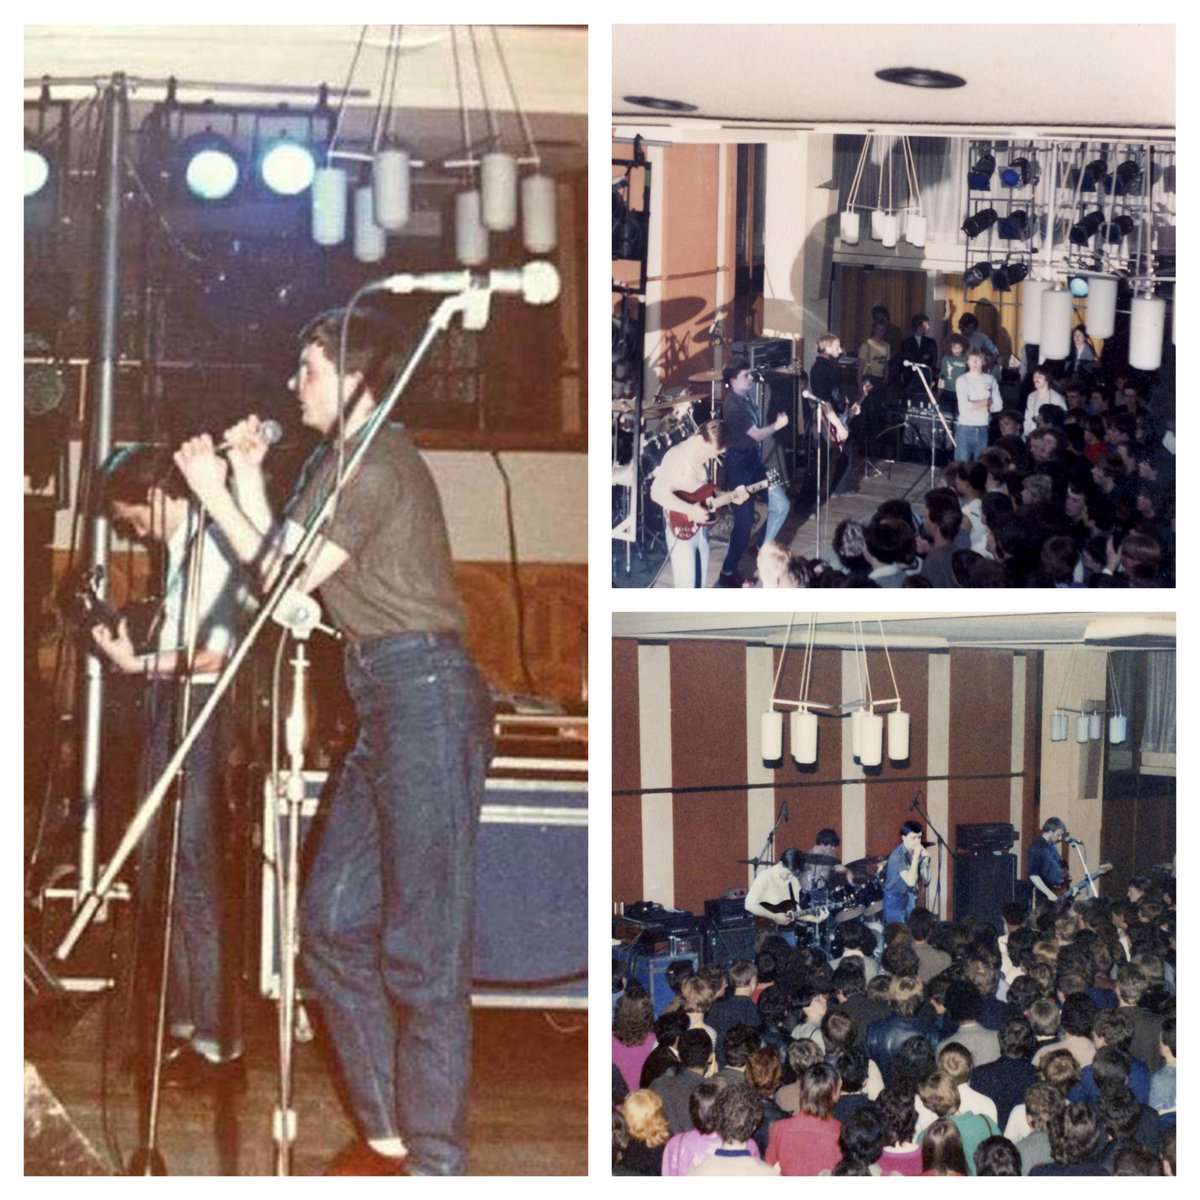 44 years ago today
Joy Division have their last concert at the University of Birmingham, May 2, 1980, two weeks before the death of singer Ian Curtis

#punkrock #postpunk #postpunkmusic #iancurtis #joydivision #history #postpunkhistory #otd